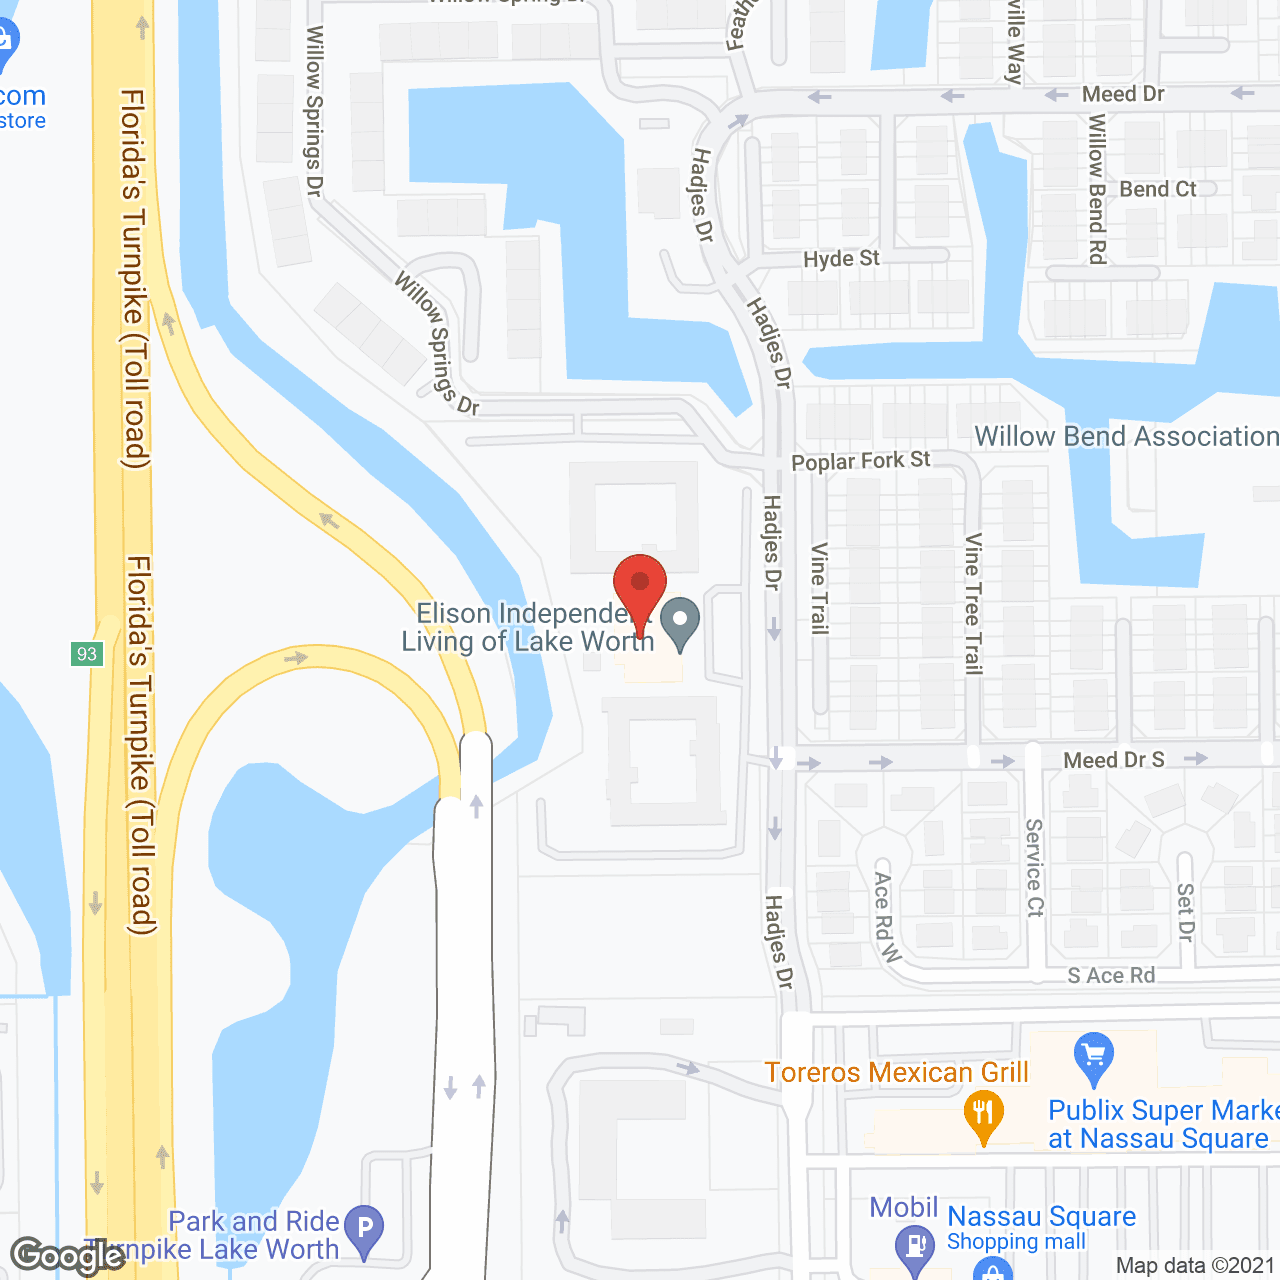 Elison of Lake Worth in google map